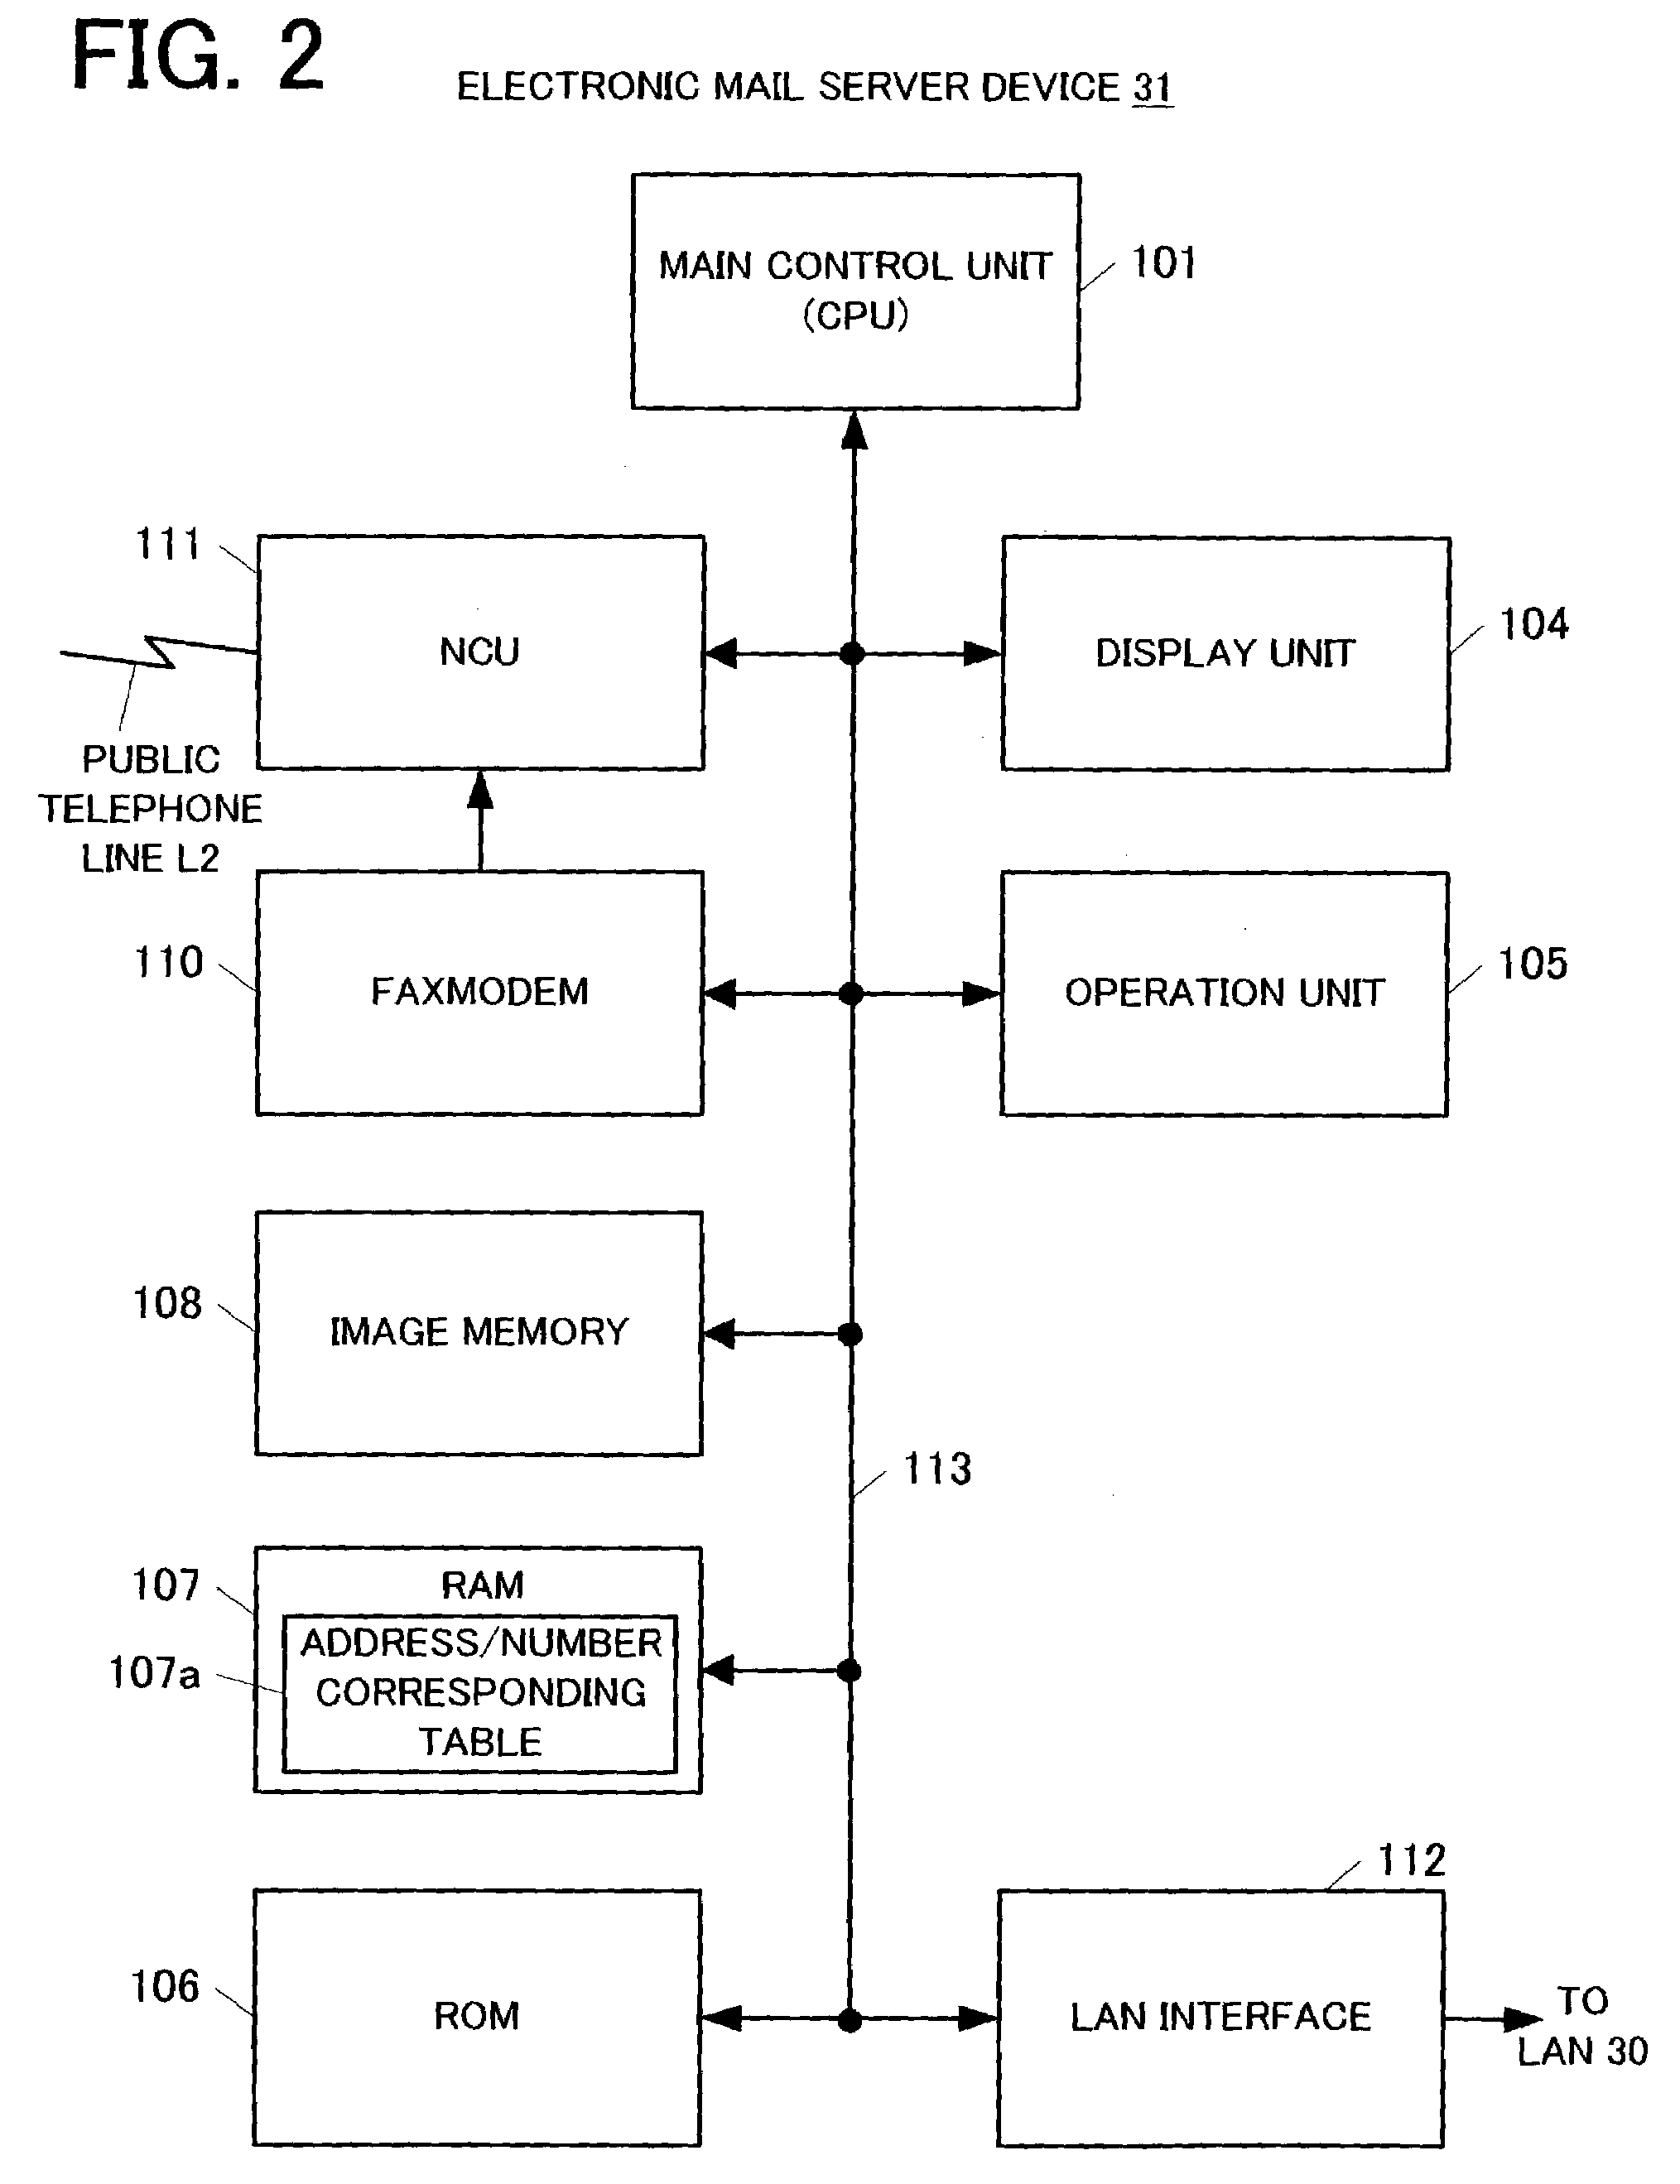 Electronic mail server with facsimile transmission on electronic mail transmission failure